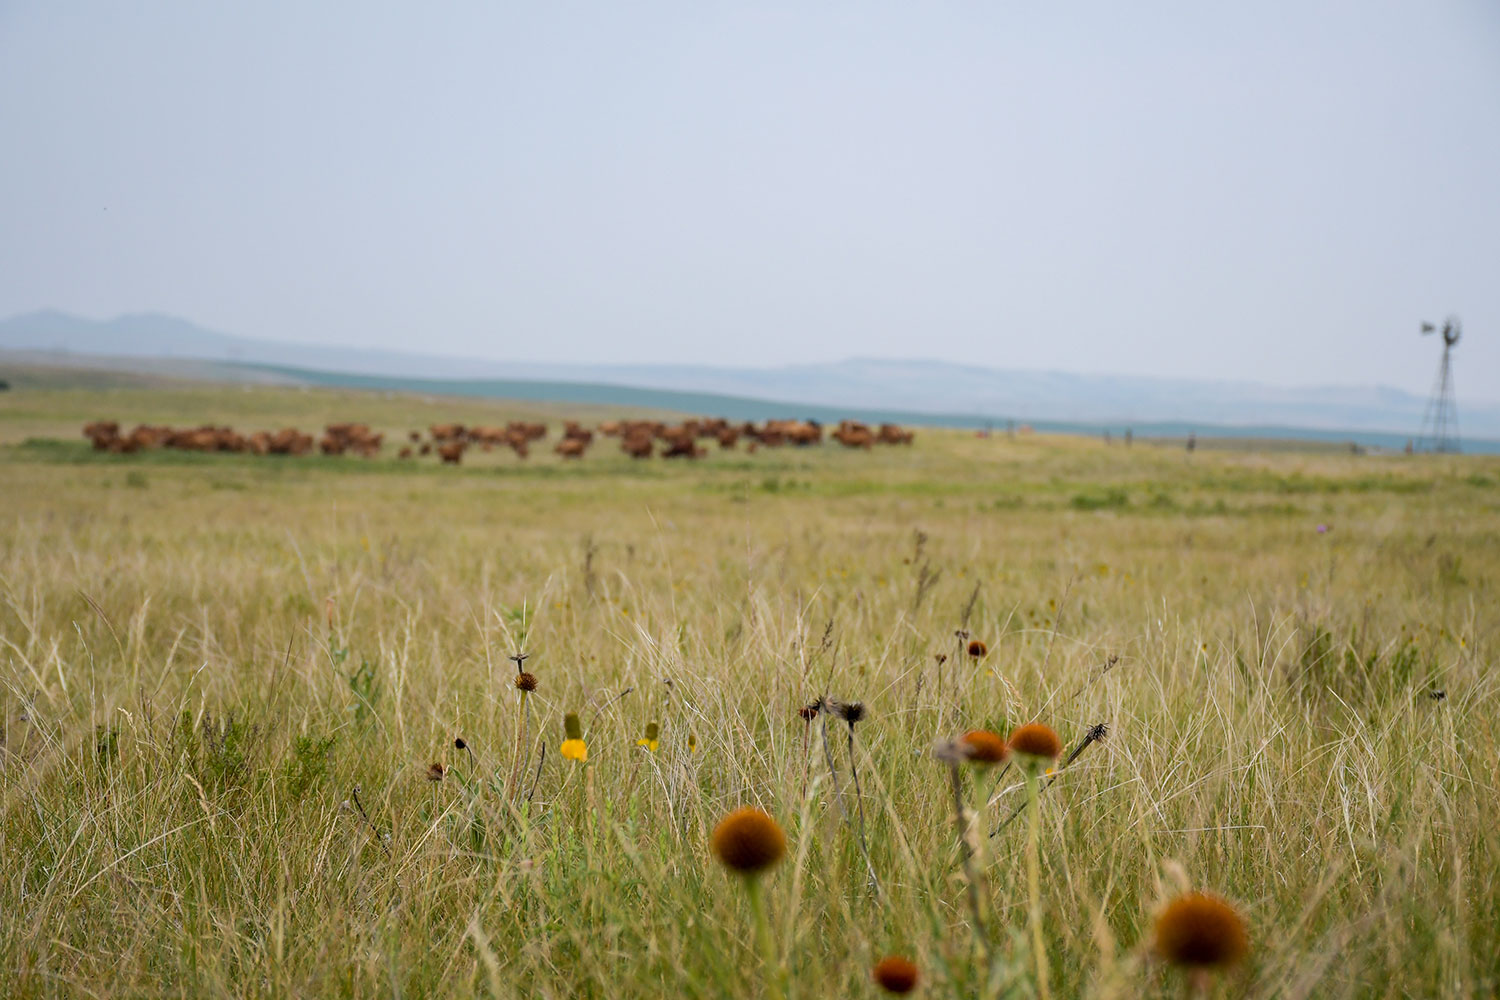 Prairie grasses in foreground, cattle grazing in back